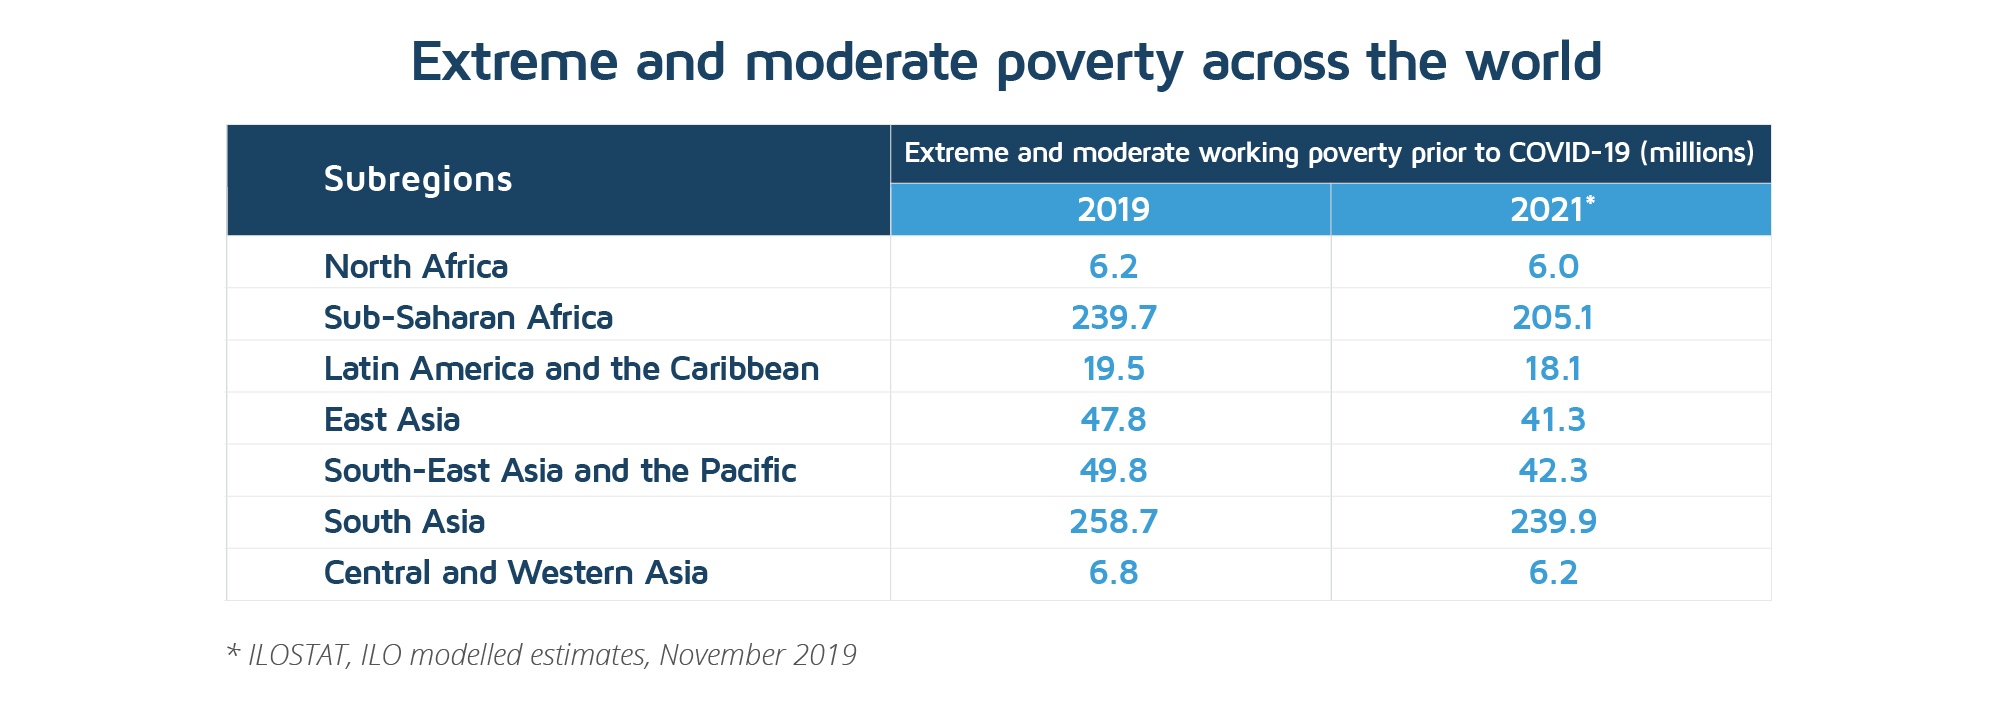 Extreme and moderate poverty across the world 